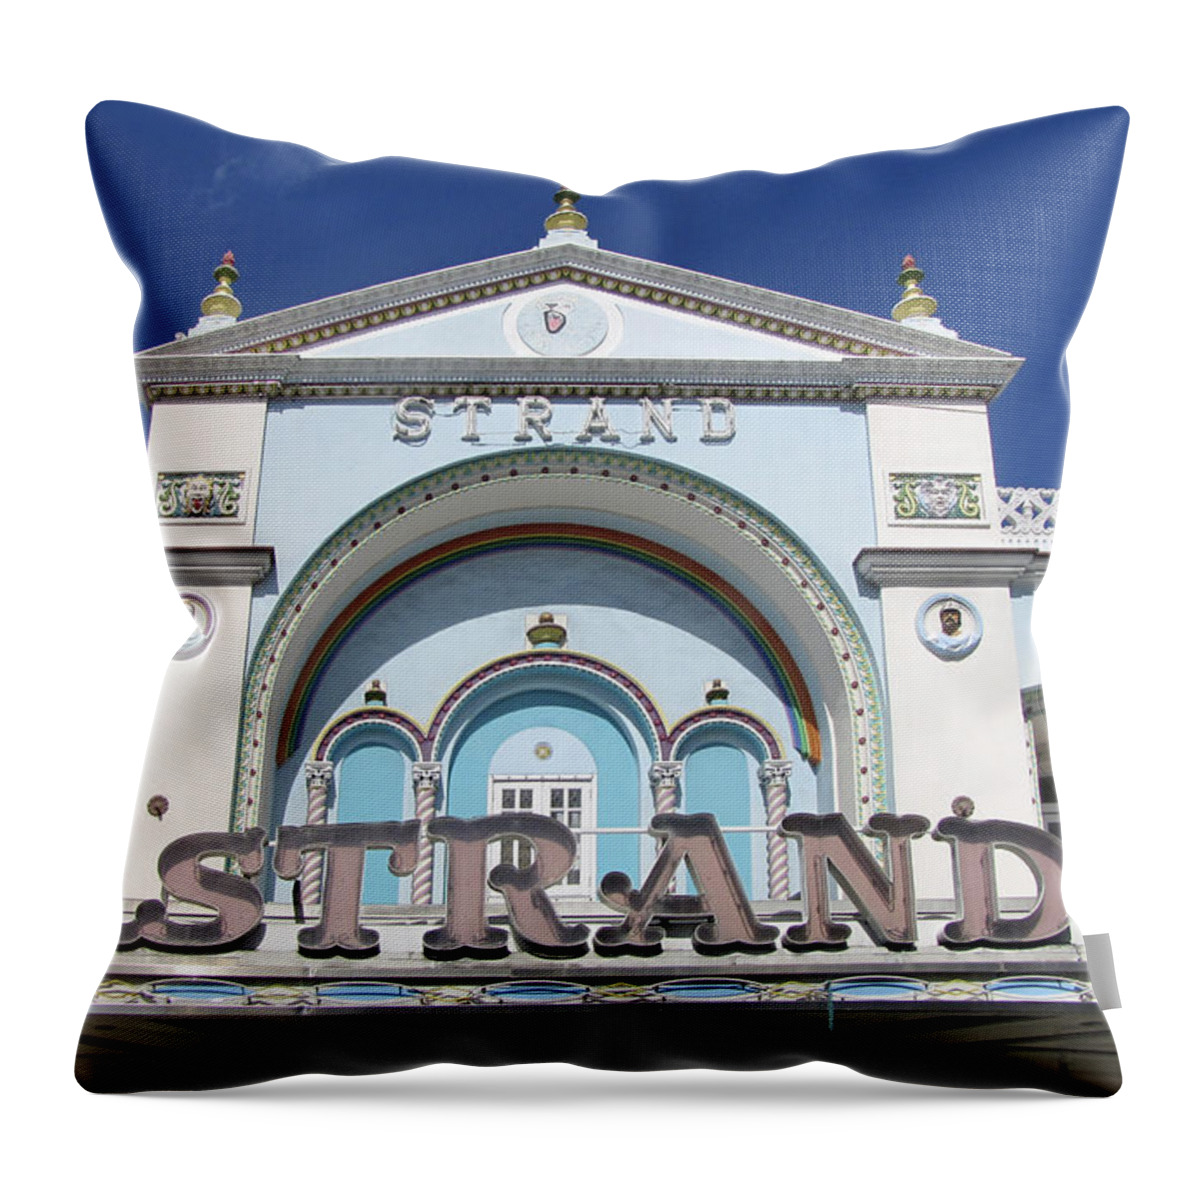 Vintage Throw Pillow featuring the photograph The Strand Key West by Bob Slitzan